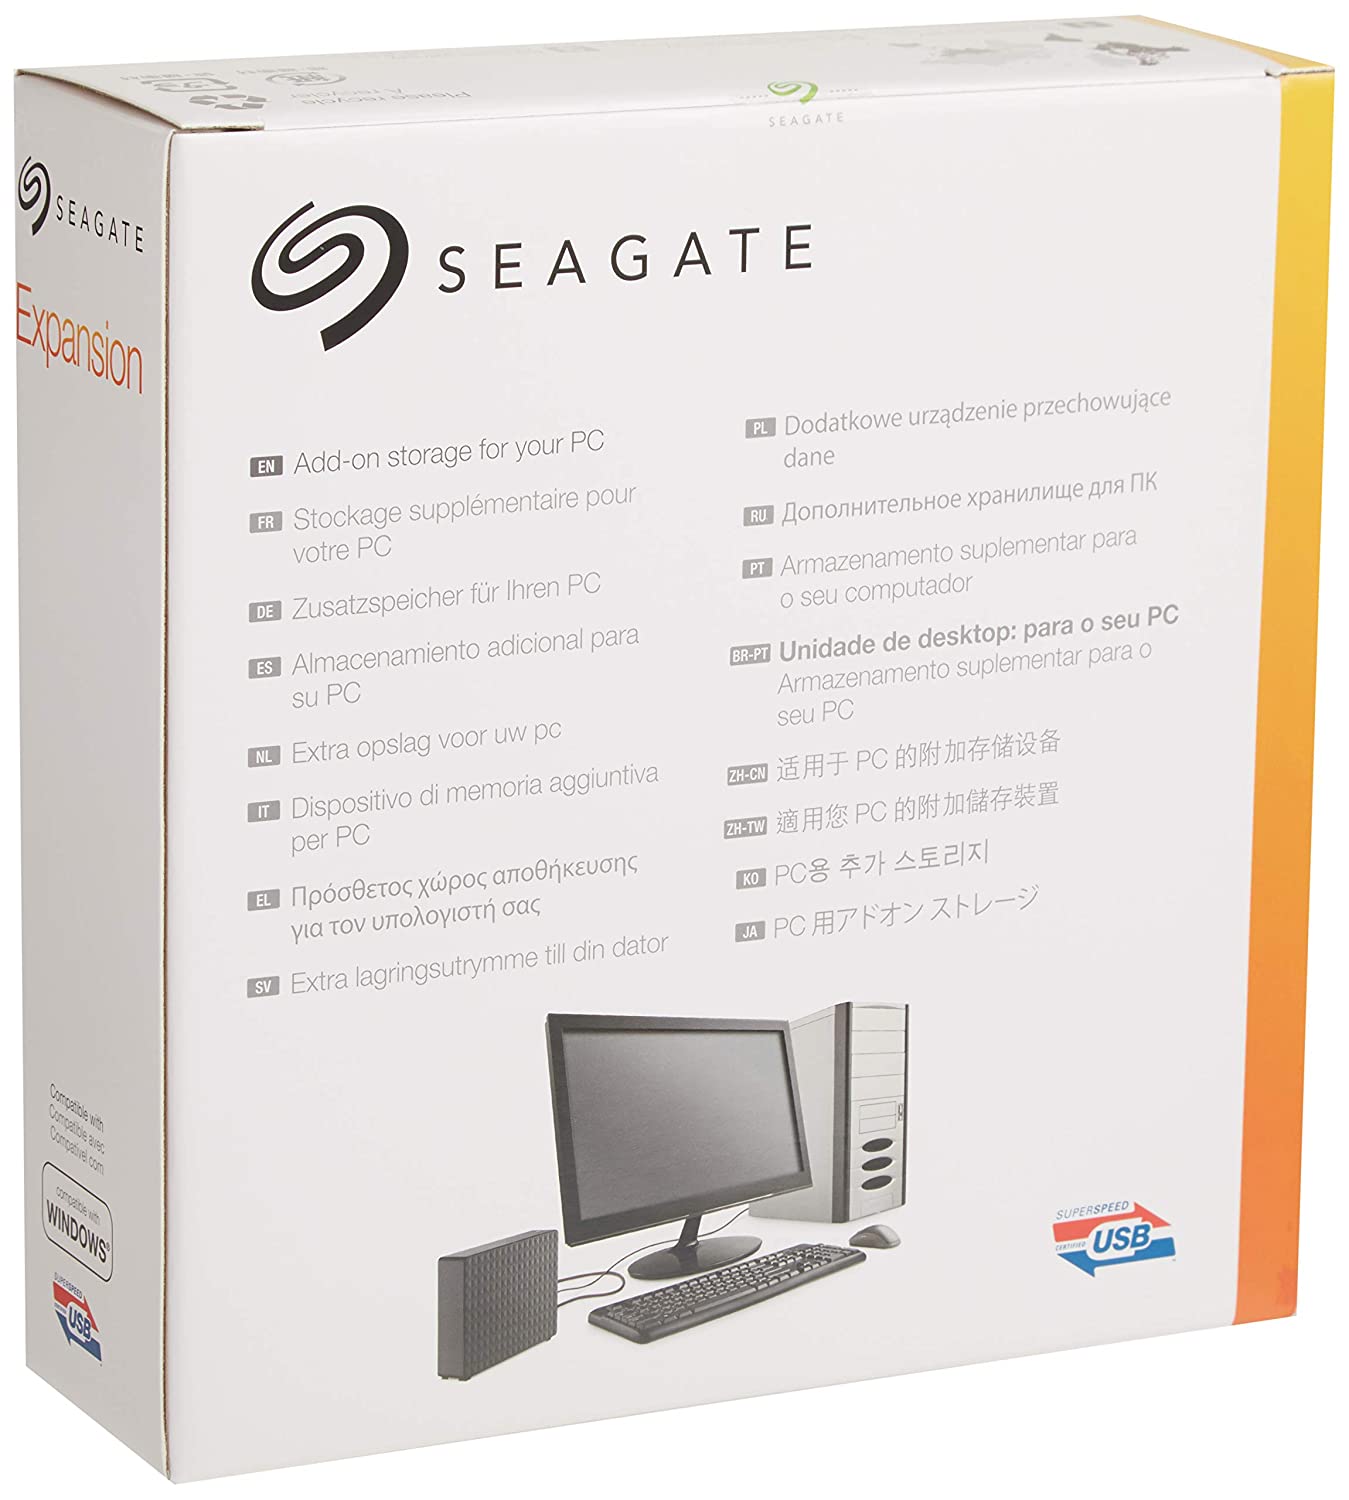 HDD-4-TB-SEAGATE-EXPANSION-(3.5)